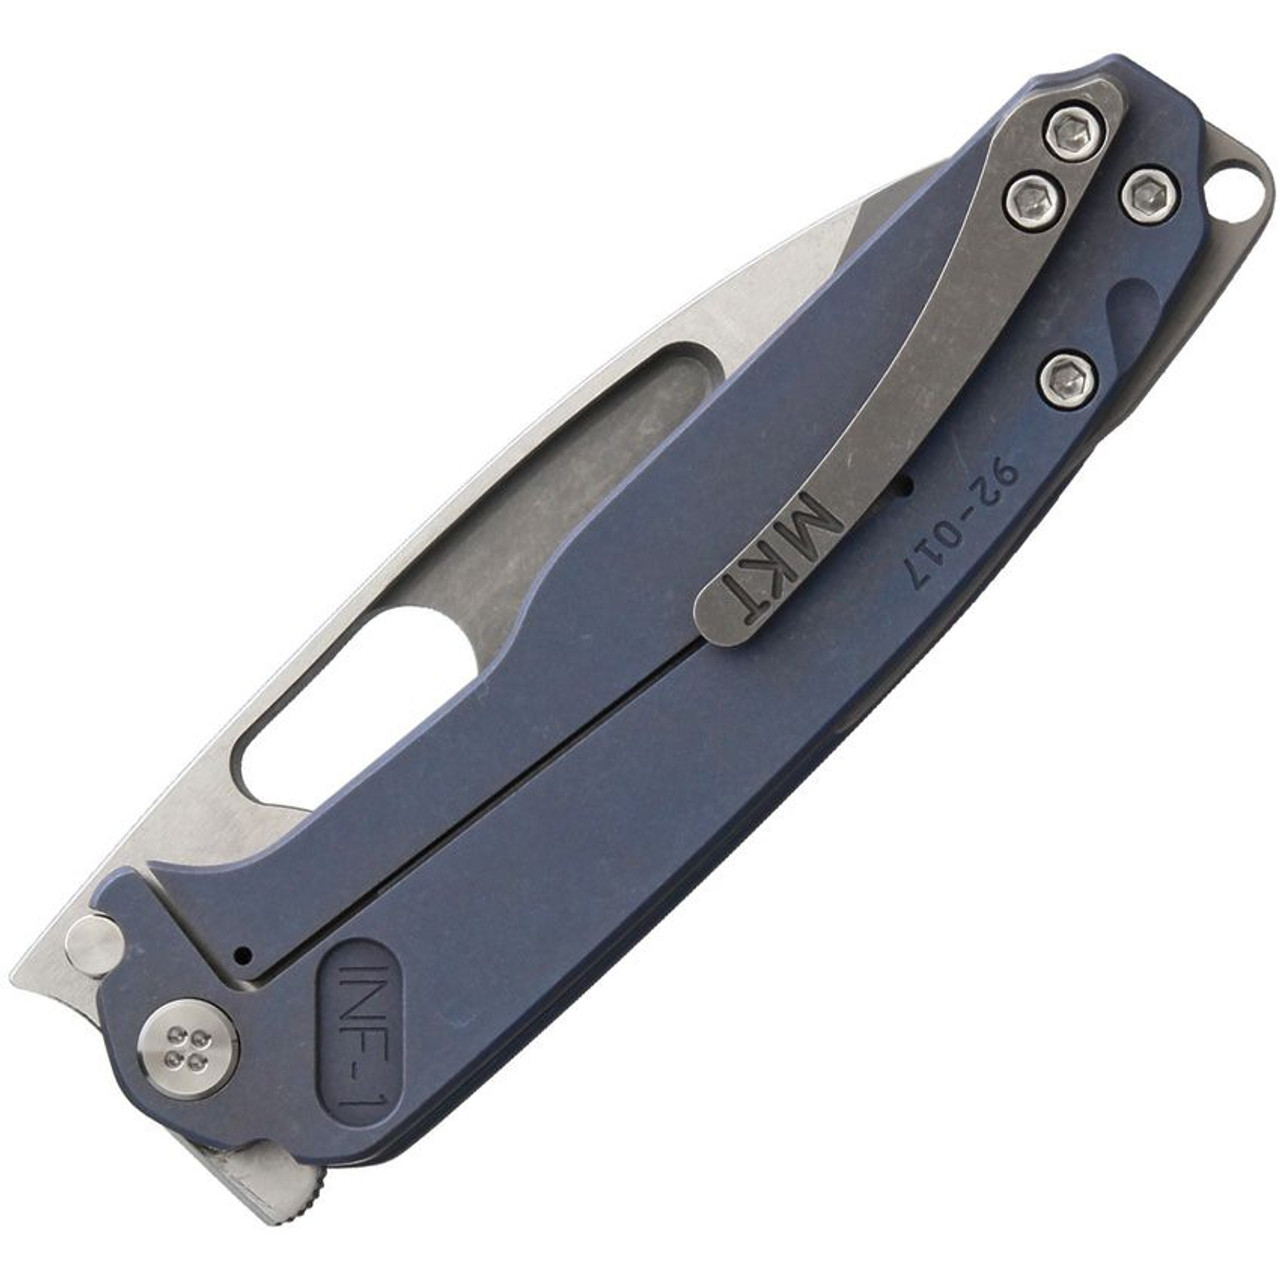 Medford Infraction Framelock (MD031STQ37A2) 3.6" Tumbled S35VN Drop Point Plain Blade, Blue Anodized Titanium Front Handle, Tumbled Titanium Back Handle, Silver Hardware